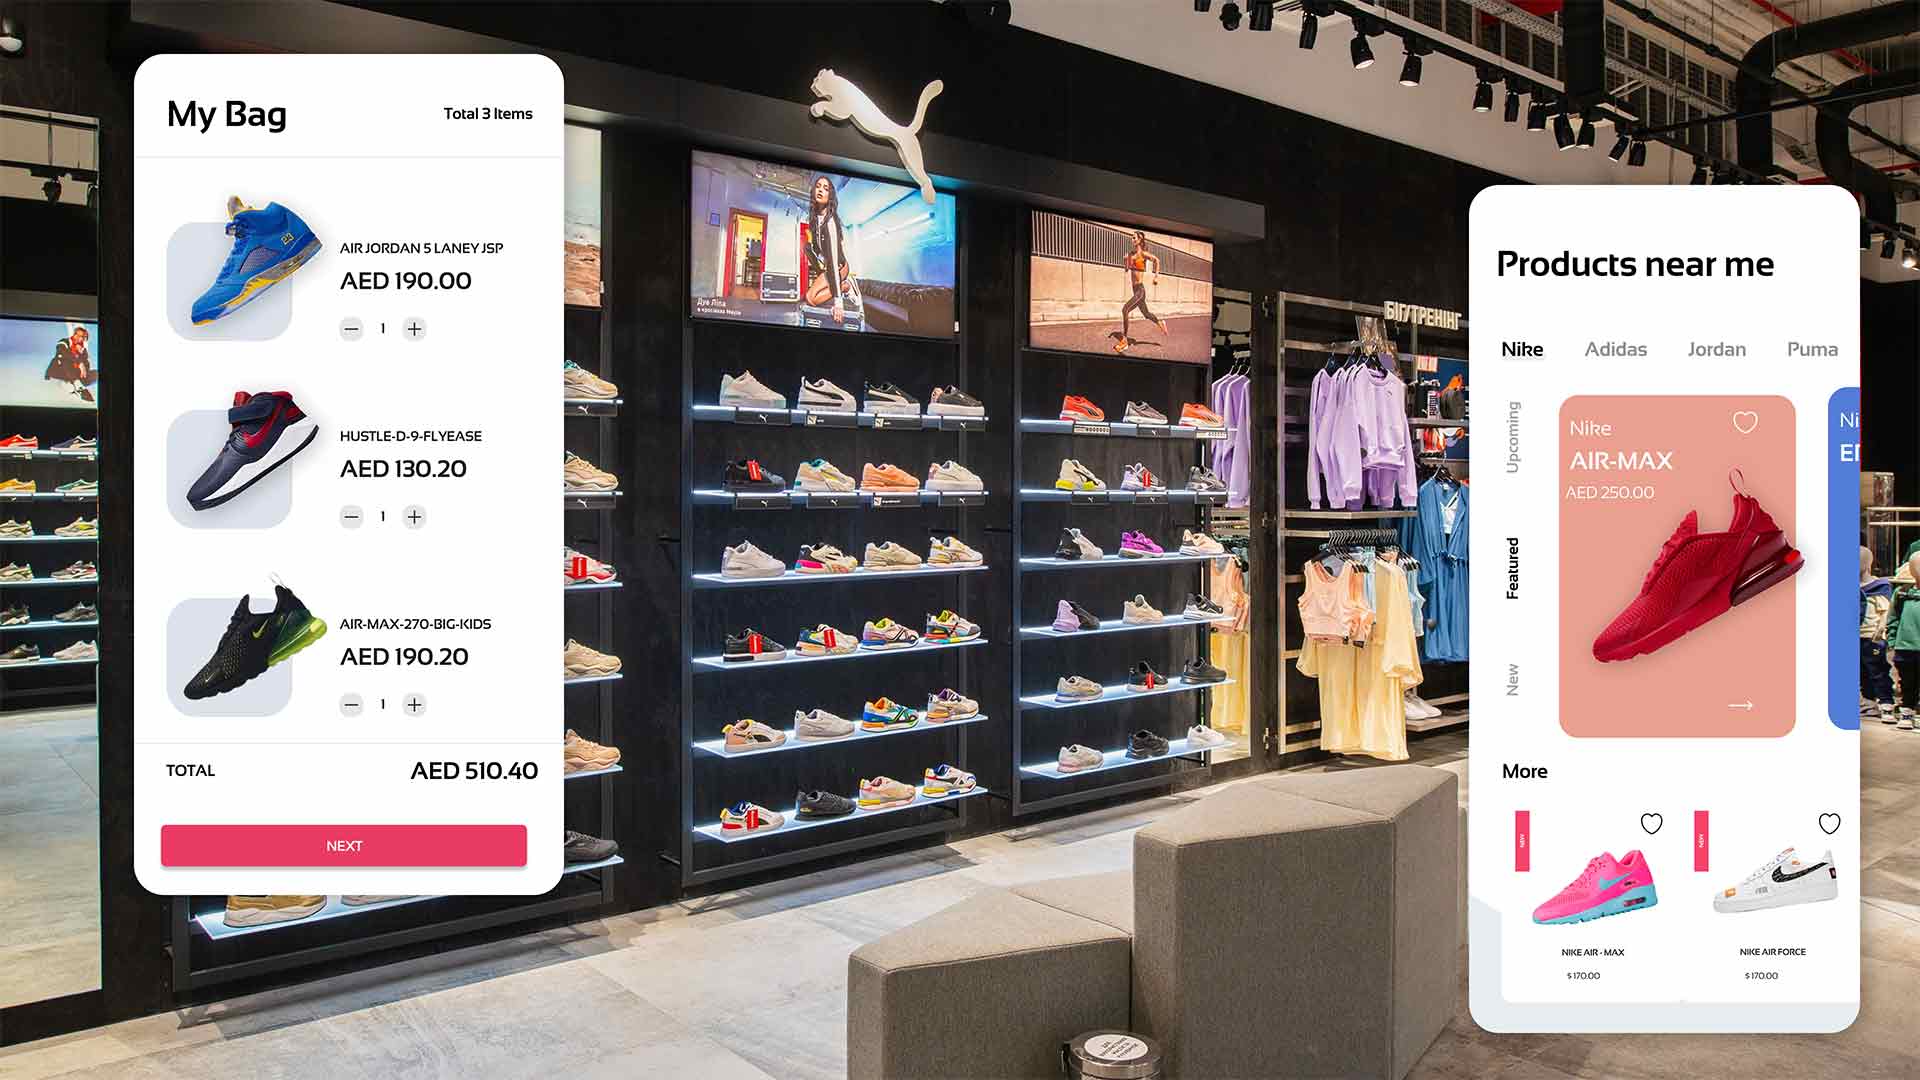 Improve your customers' shopping experience by enabling them to explore nearby products, providing them with the opportunity to access a comprehensive range of options and make well-informed purchasing decisions.